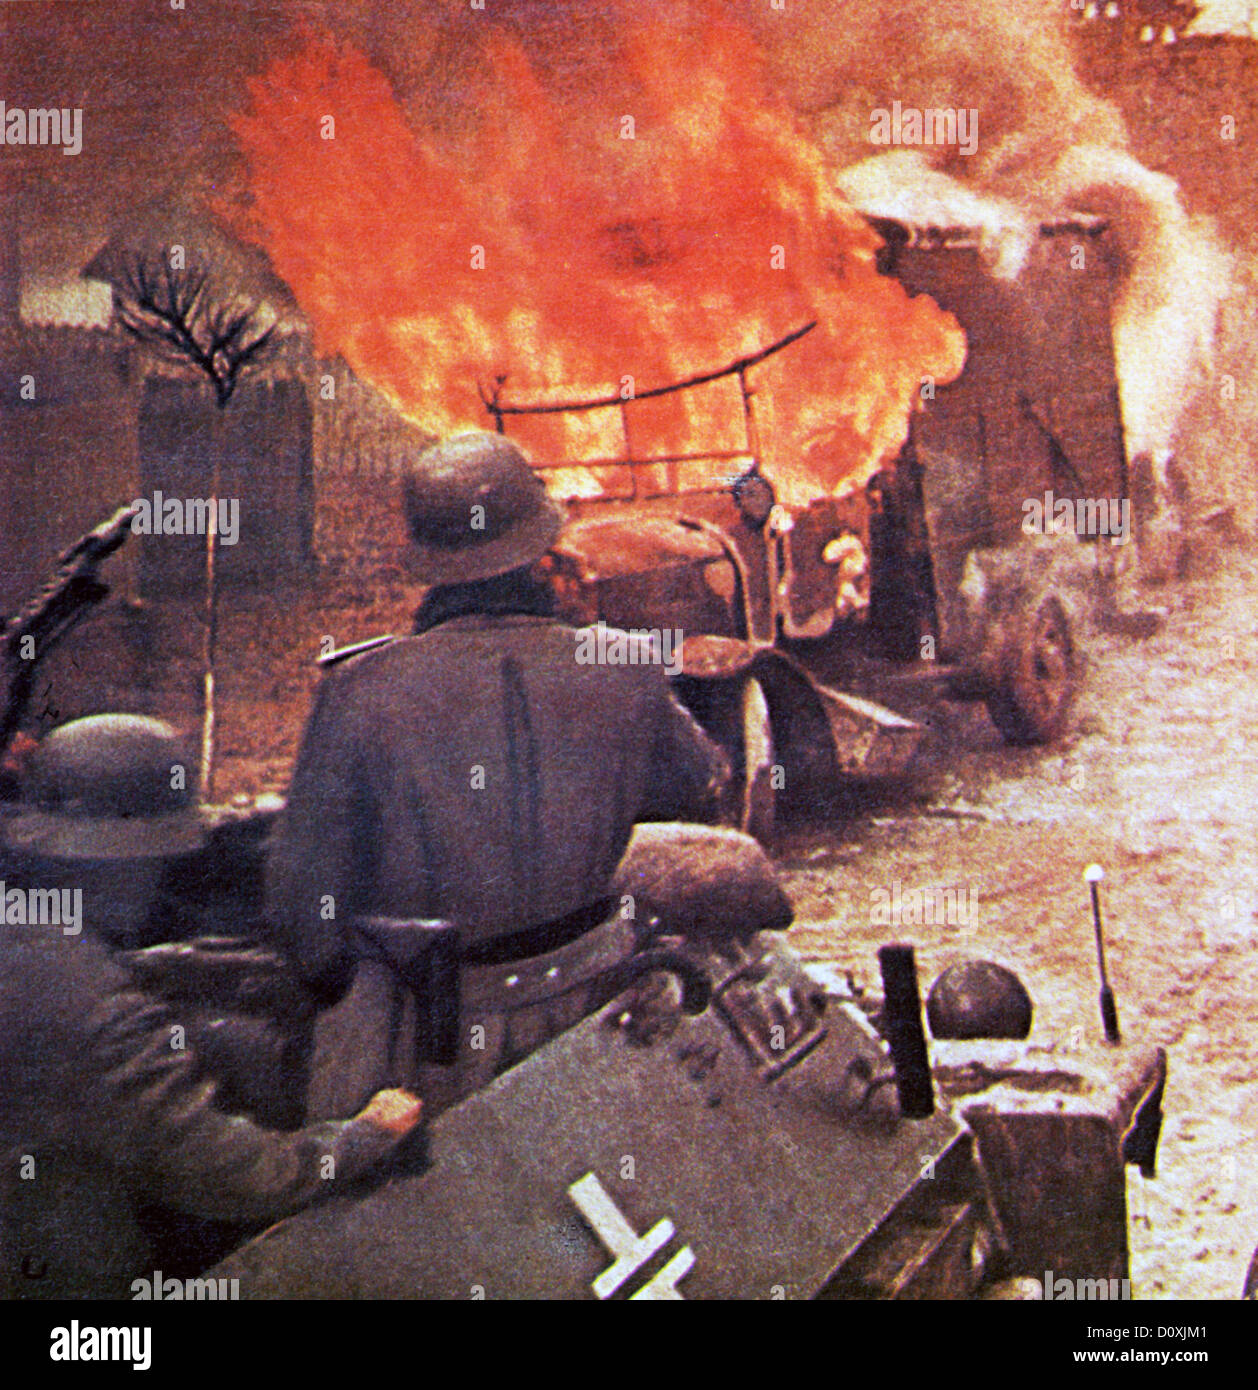 Operation, Barbarossa,  German, soldiers, armoured vehicle, Wehrmacht, burning, Russian, truck, invasion, USSR, World War II, So Stock Photo